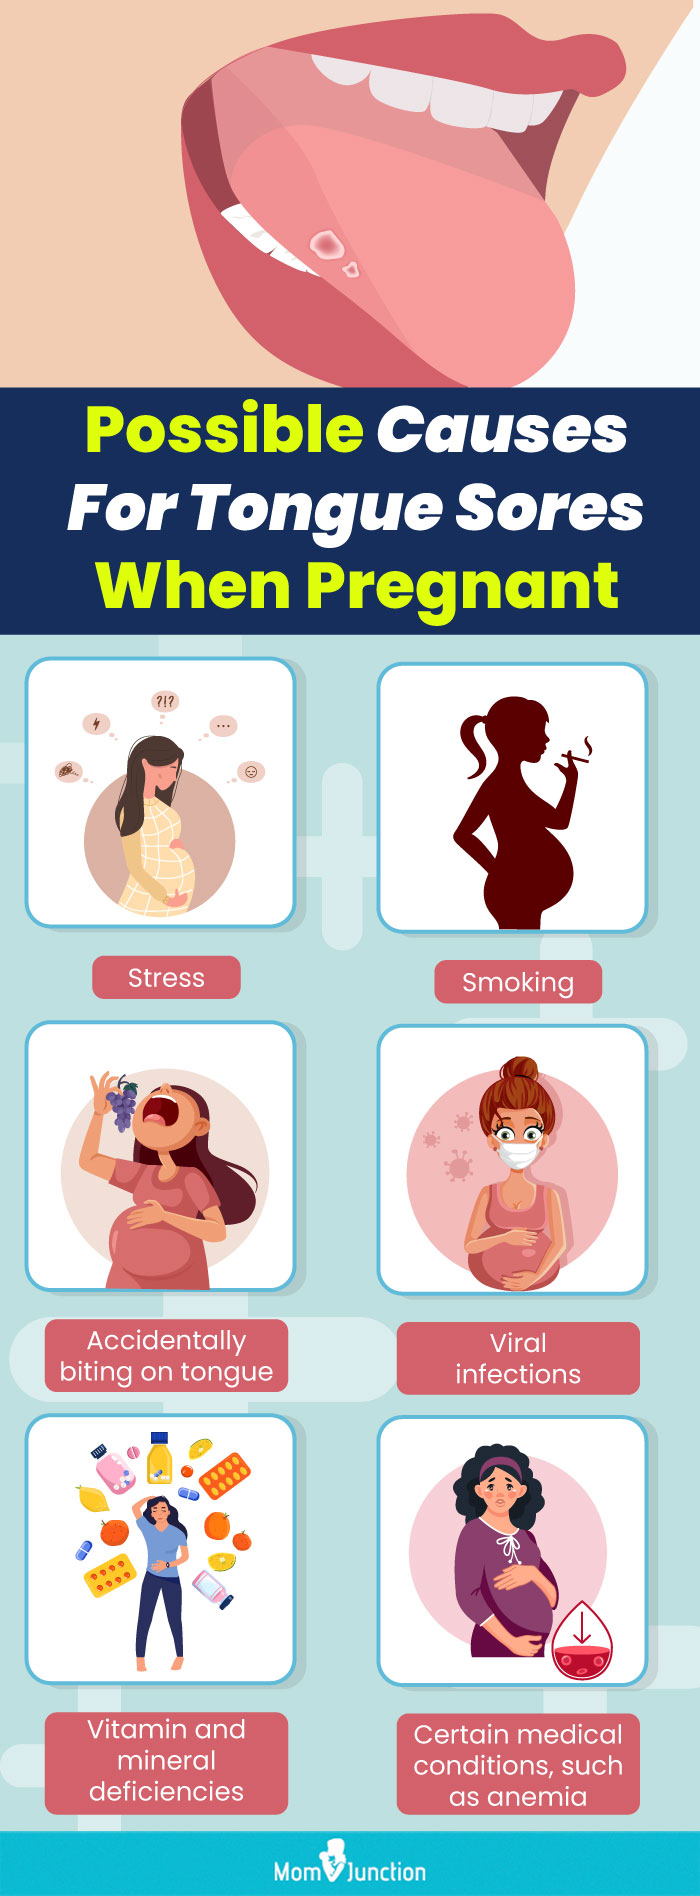 possible causes for tongue sores when pregnant [infographic]